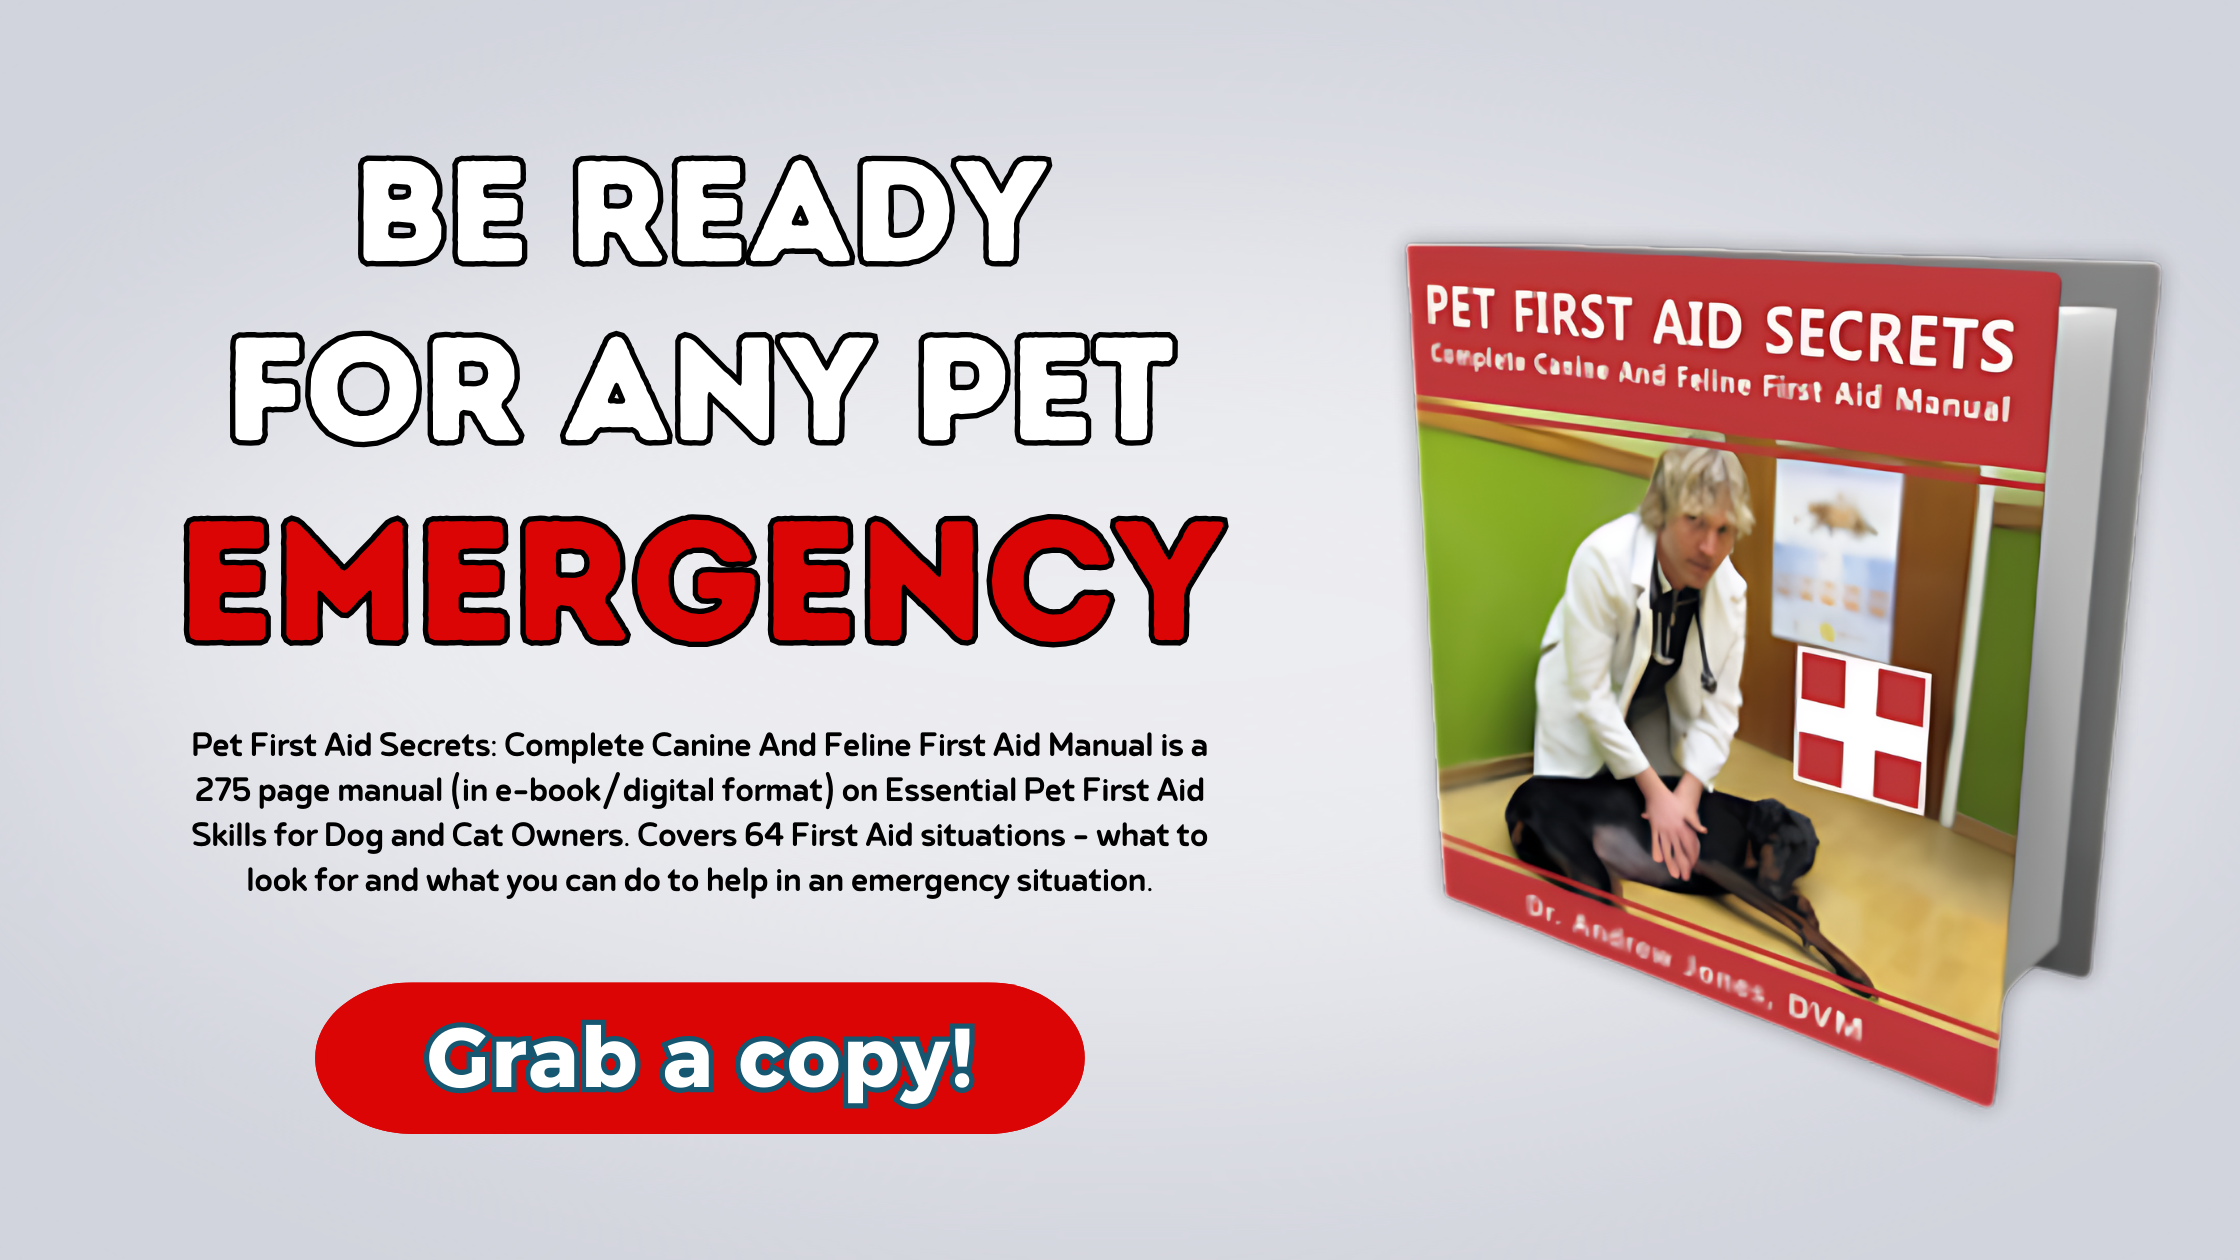 275 Pages of detailed content covering EVERY COMMON DOG AND CAT EMERGENCY